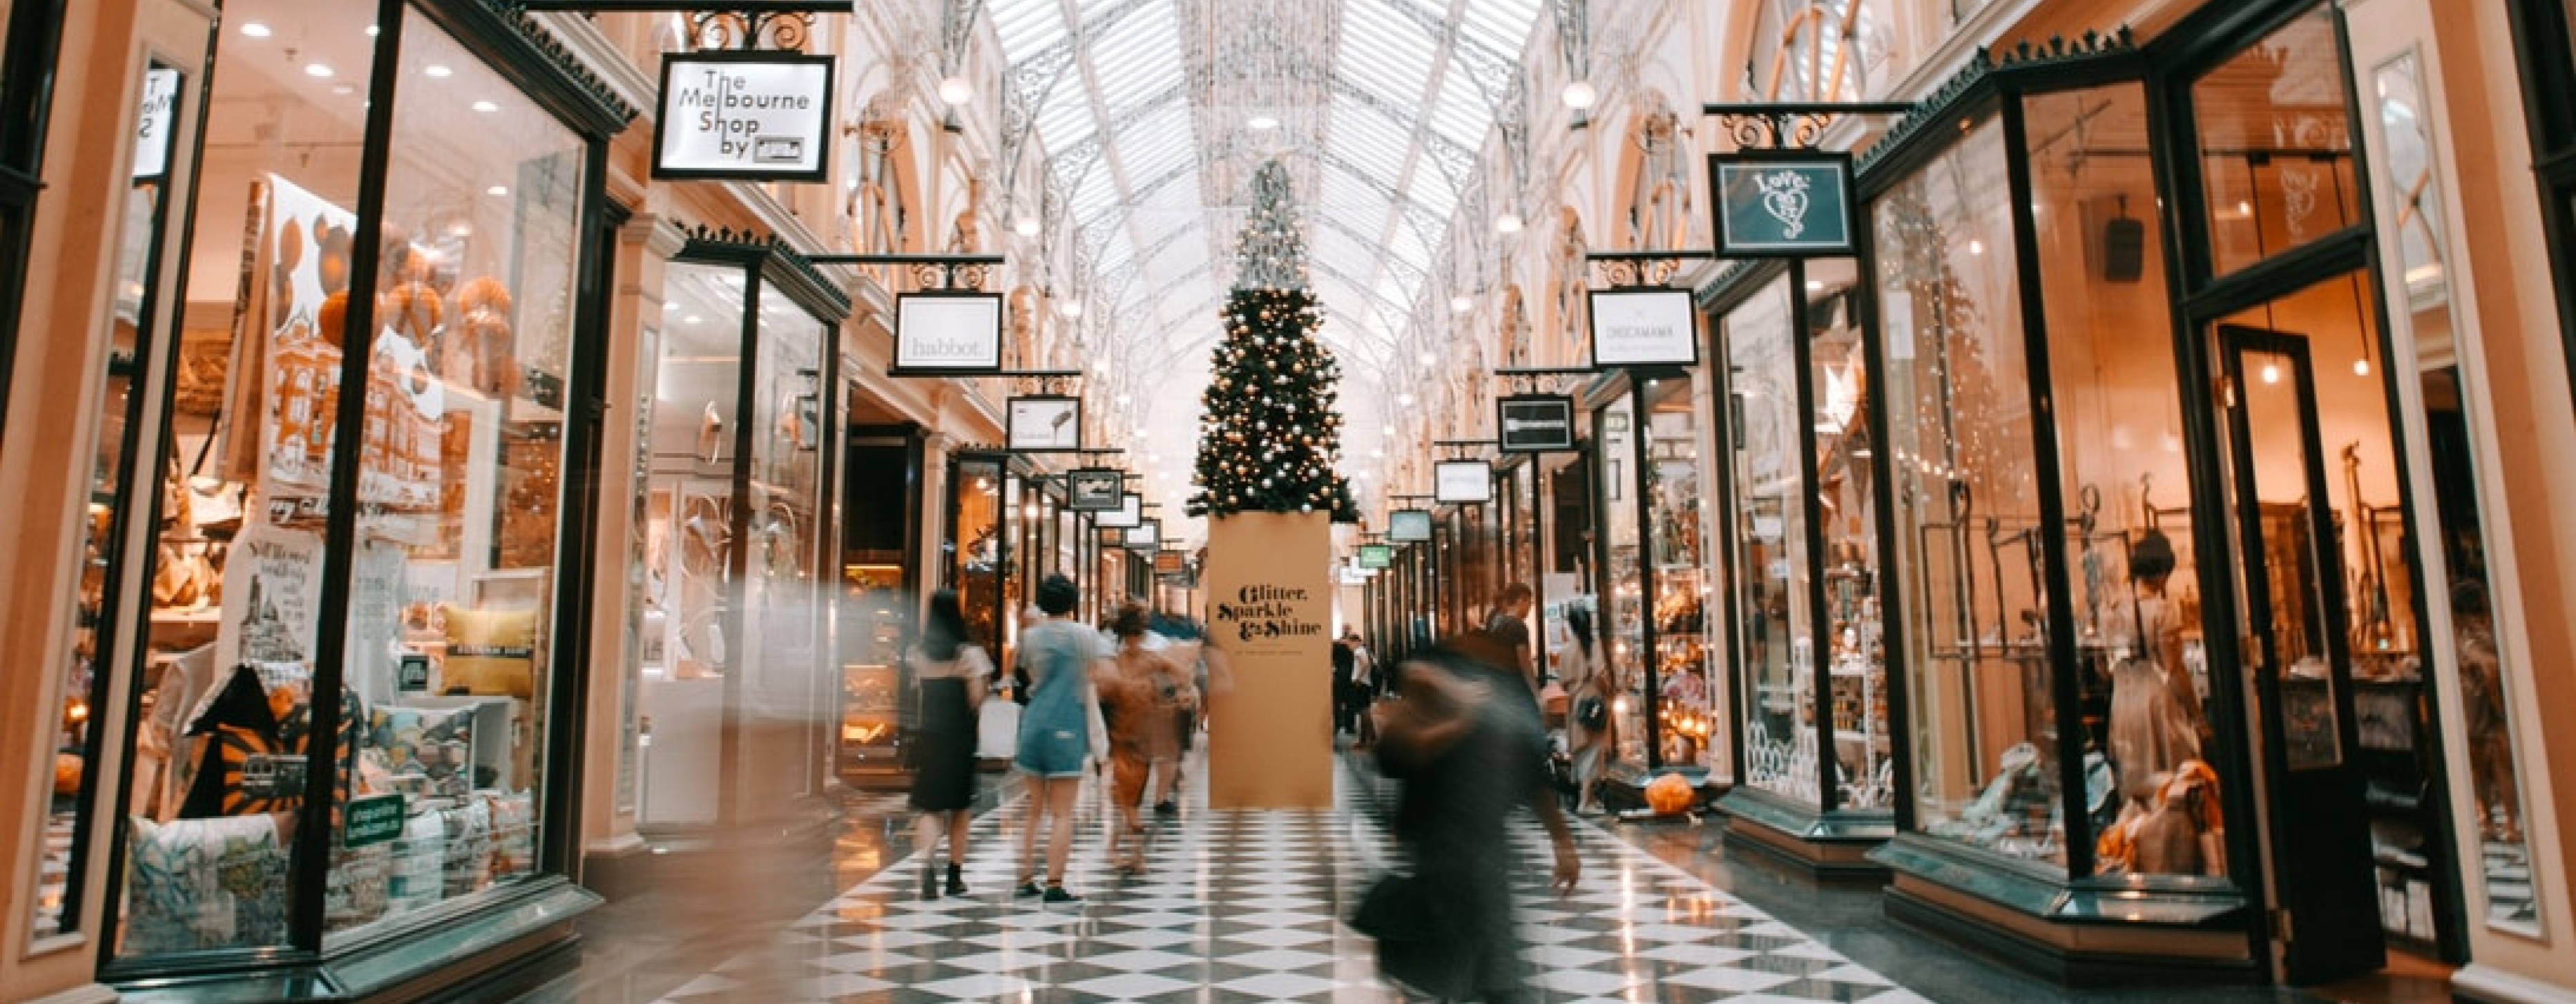 Shopping-arcade-with-Christmas-decorations